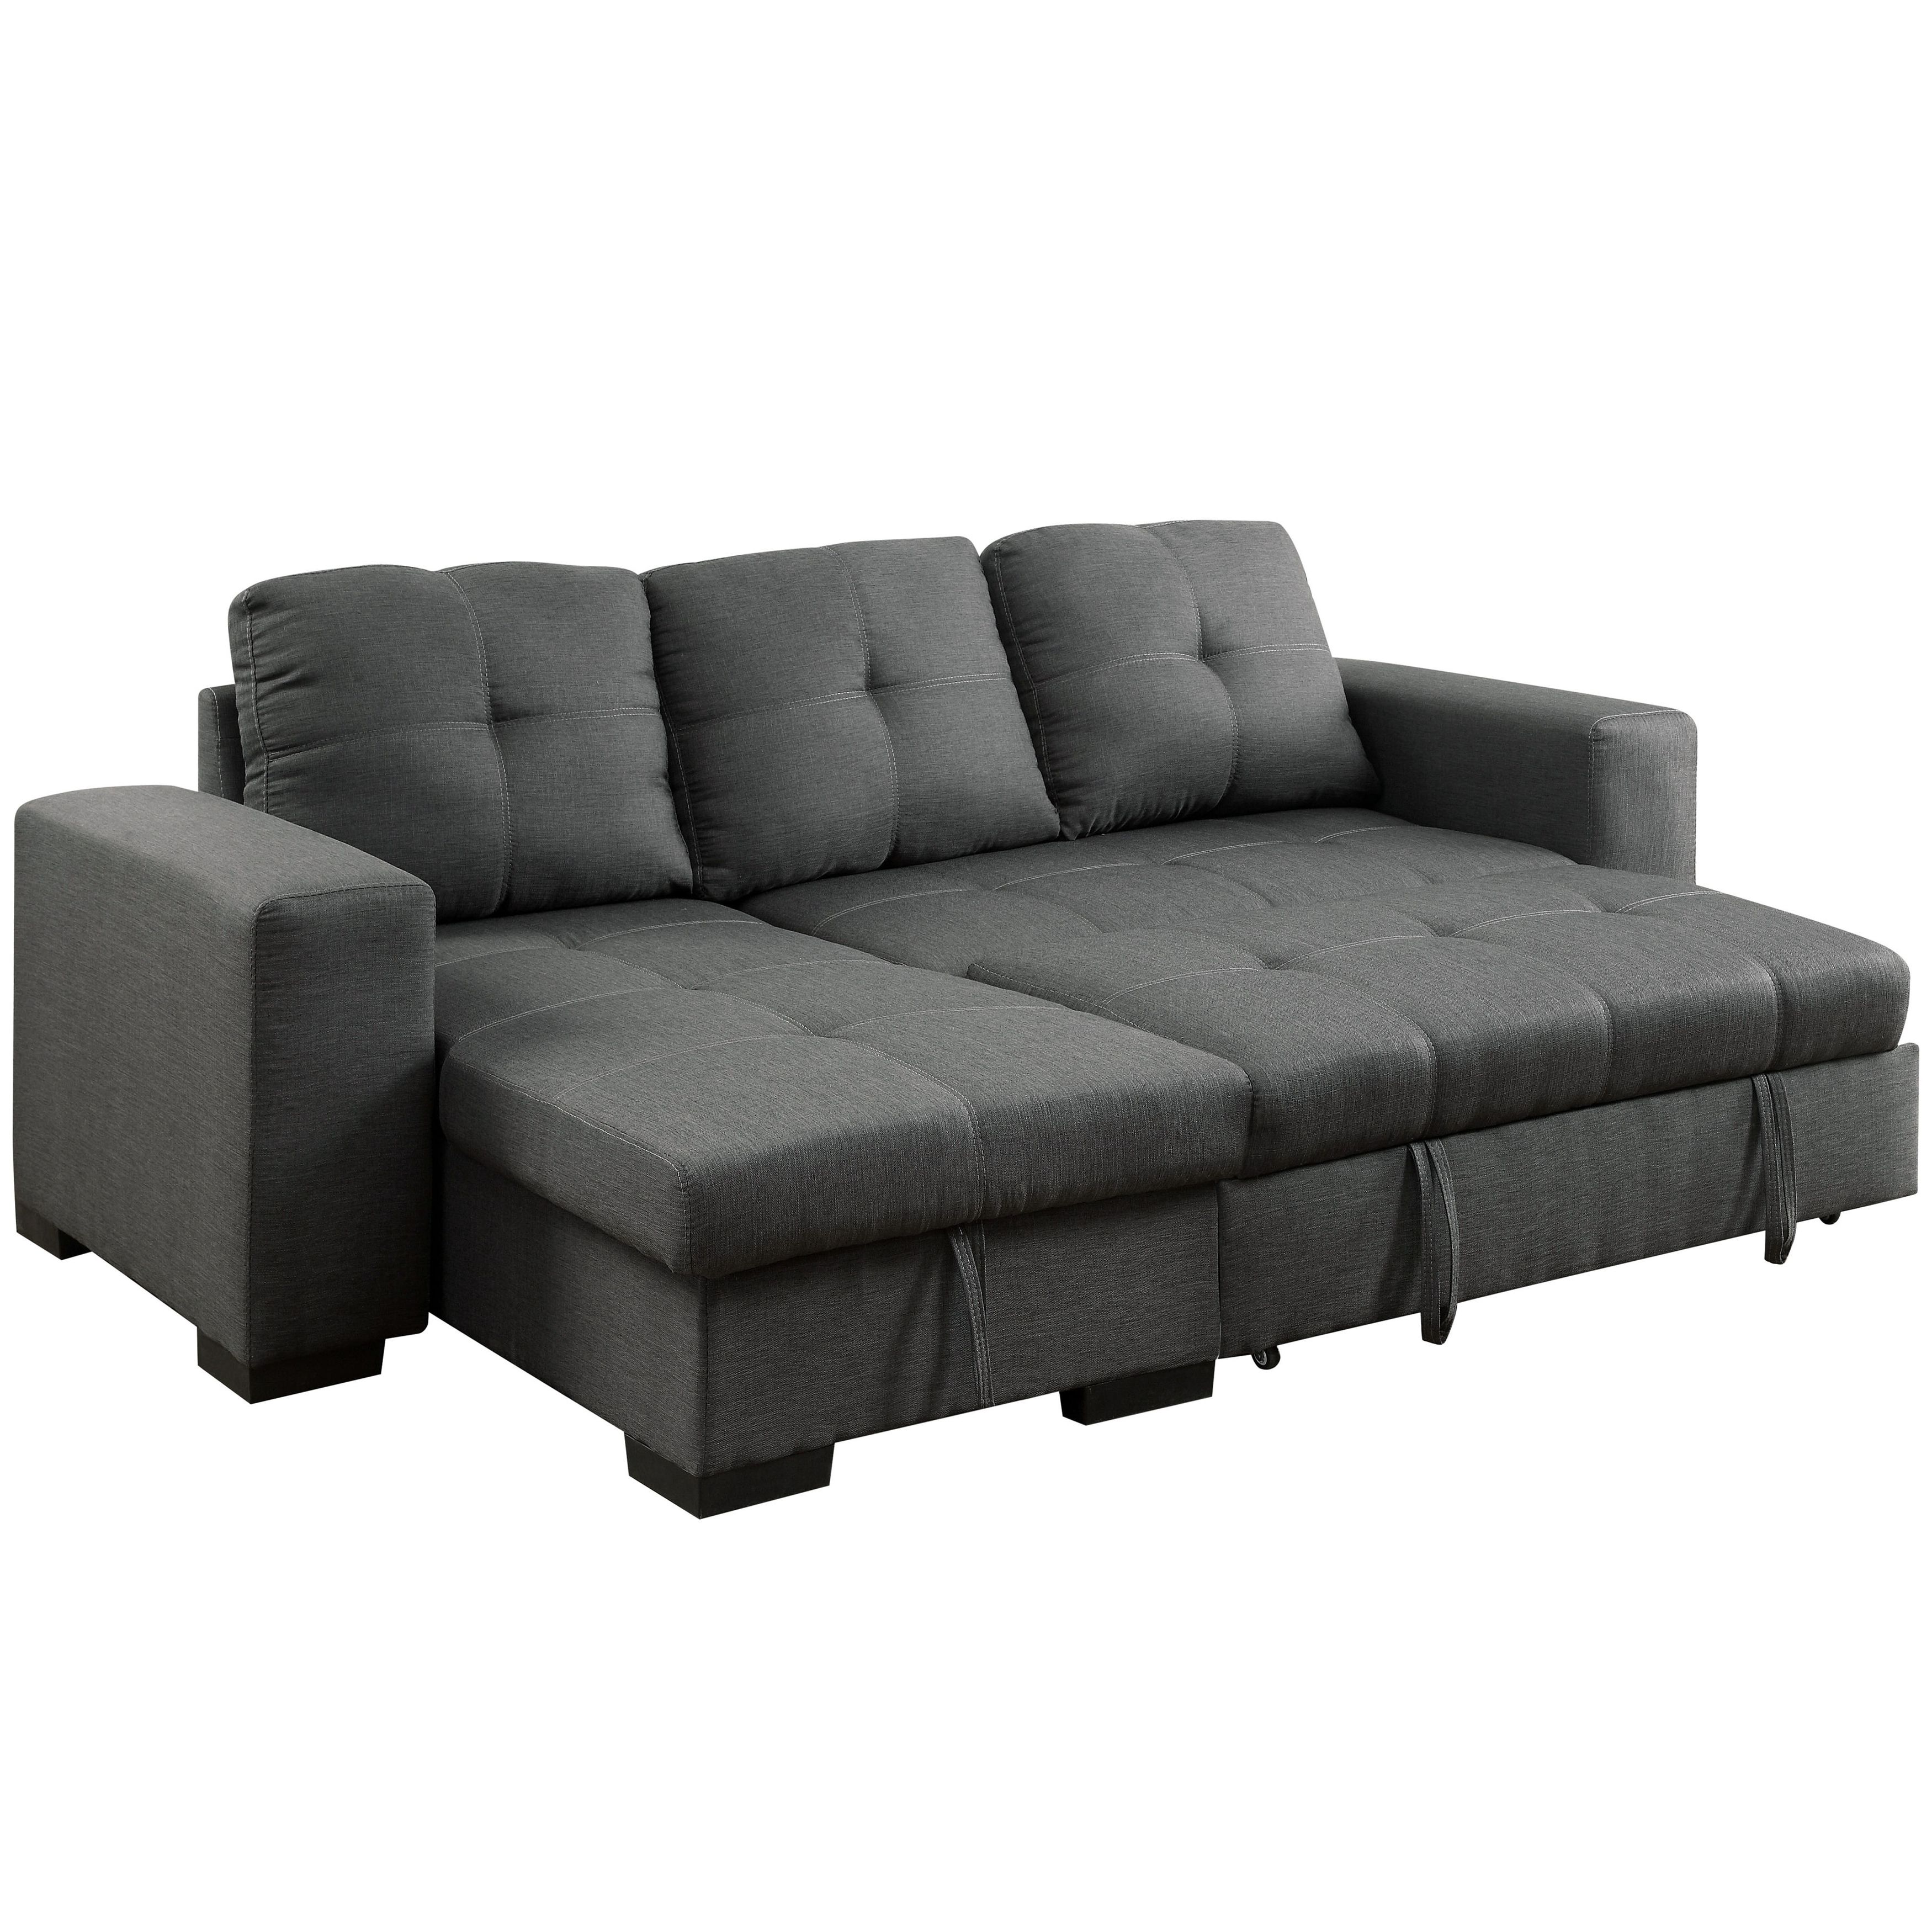 Furniture Of America Sagel Reversible Sectional With Pull Out With Fashionable Sofas With Reversible Chaise Lounge (View 3 of 15)